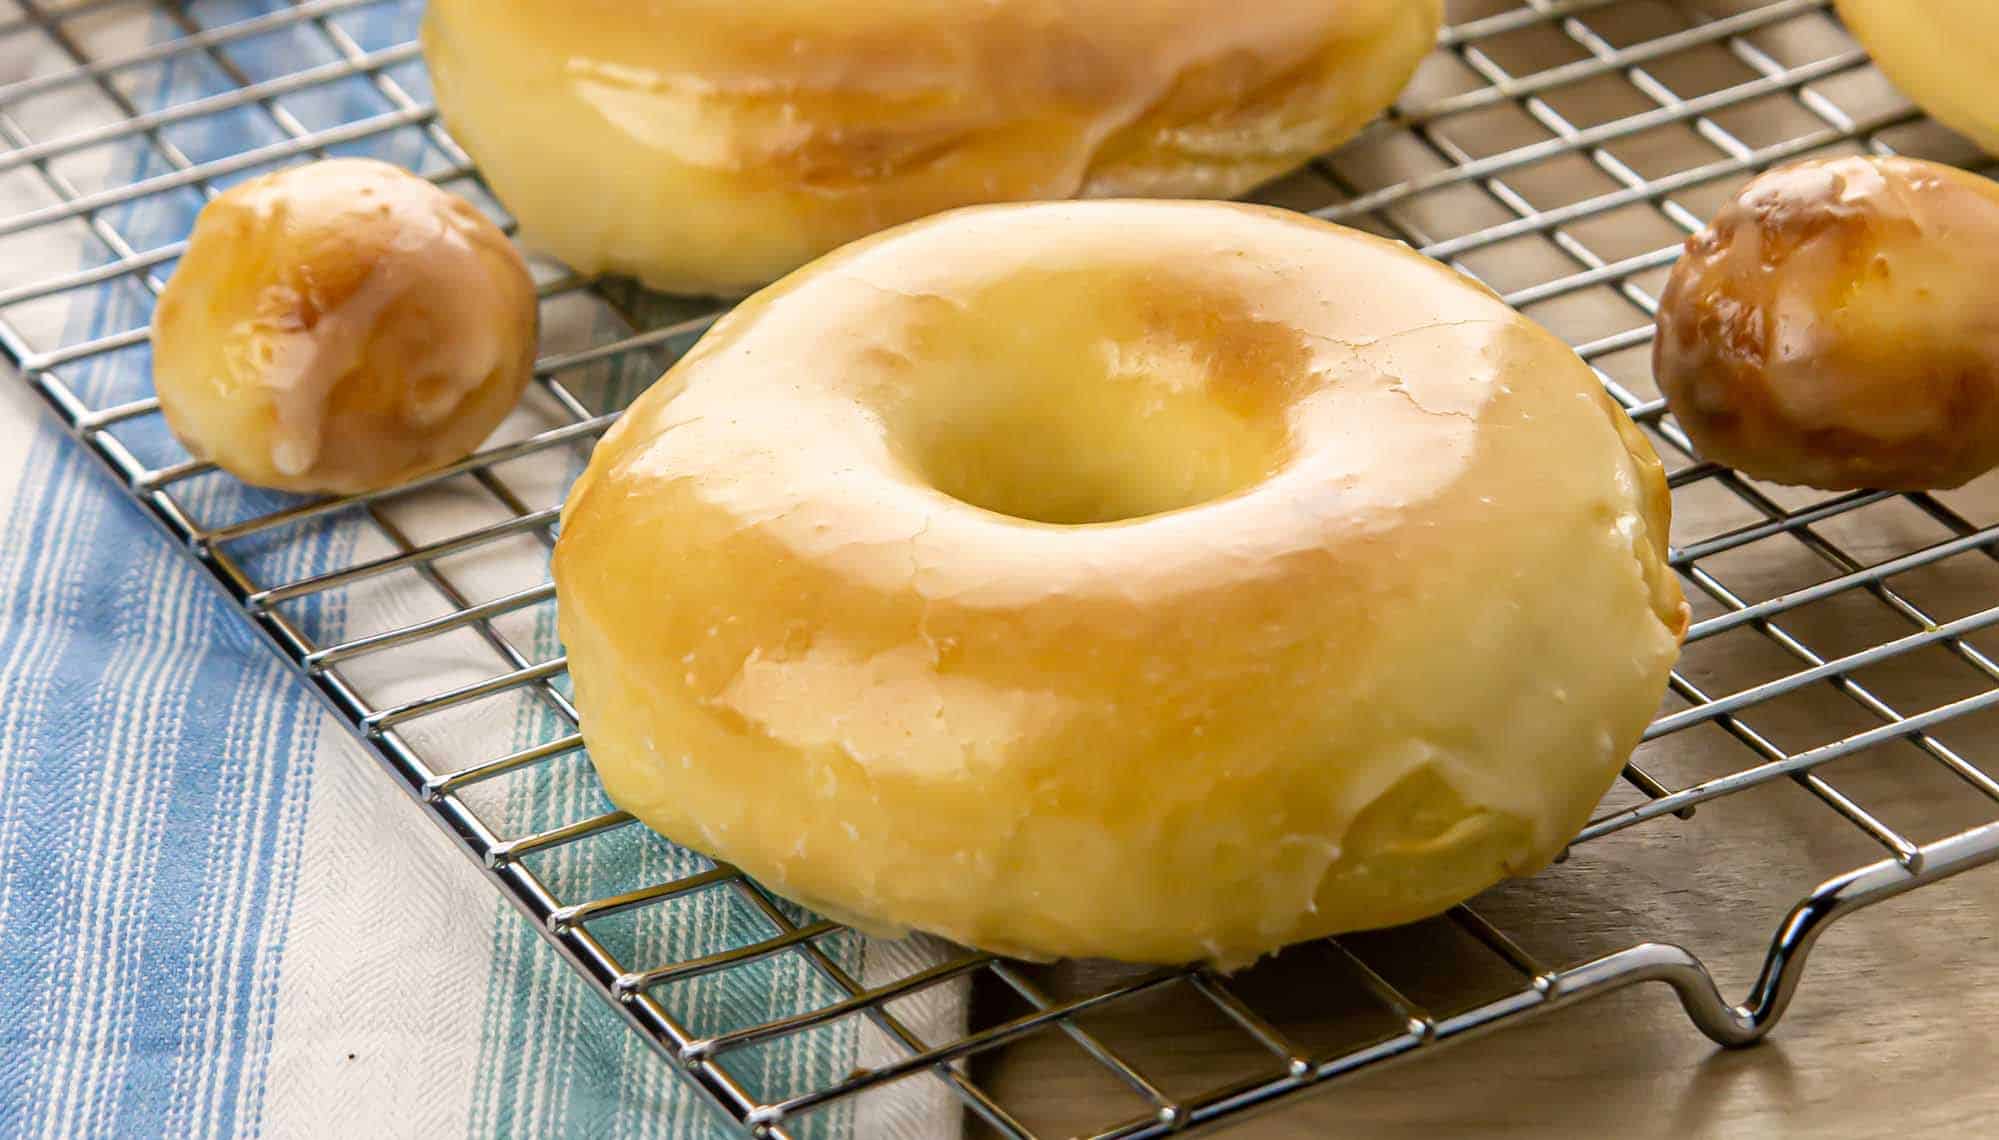 A close-up view of air-fried yeast donuts placed on a wire cooling rack.